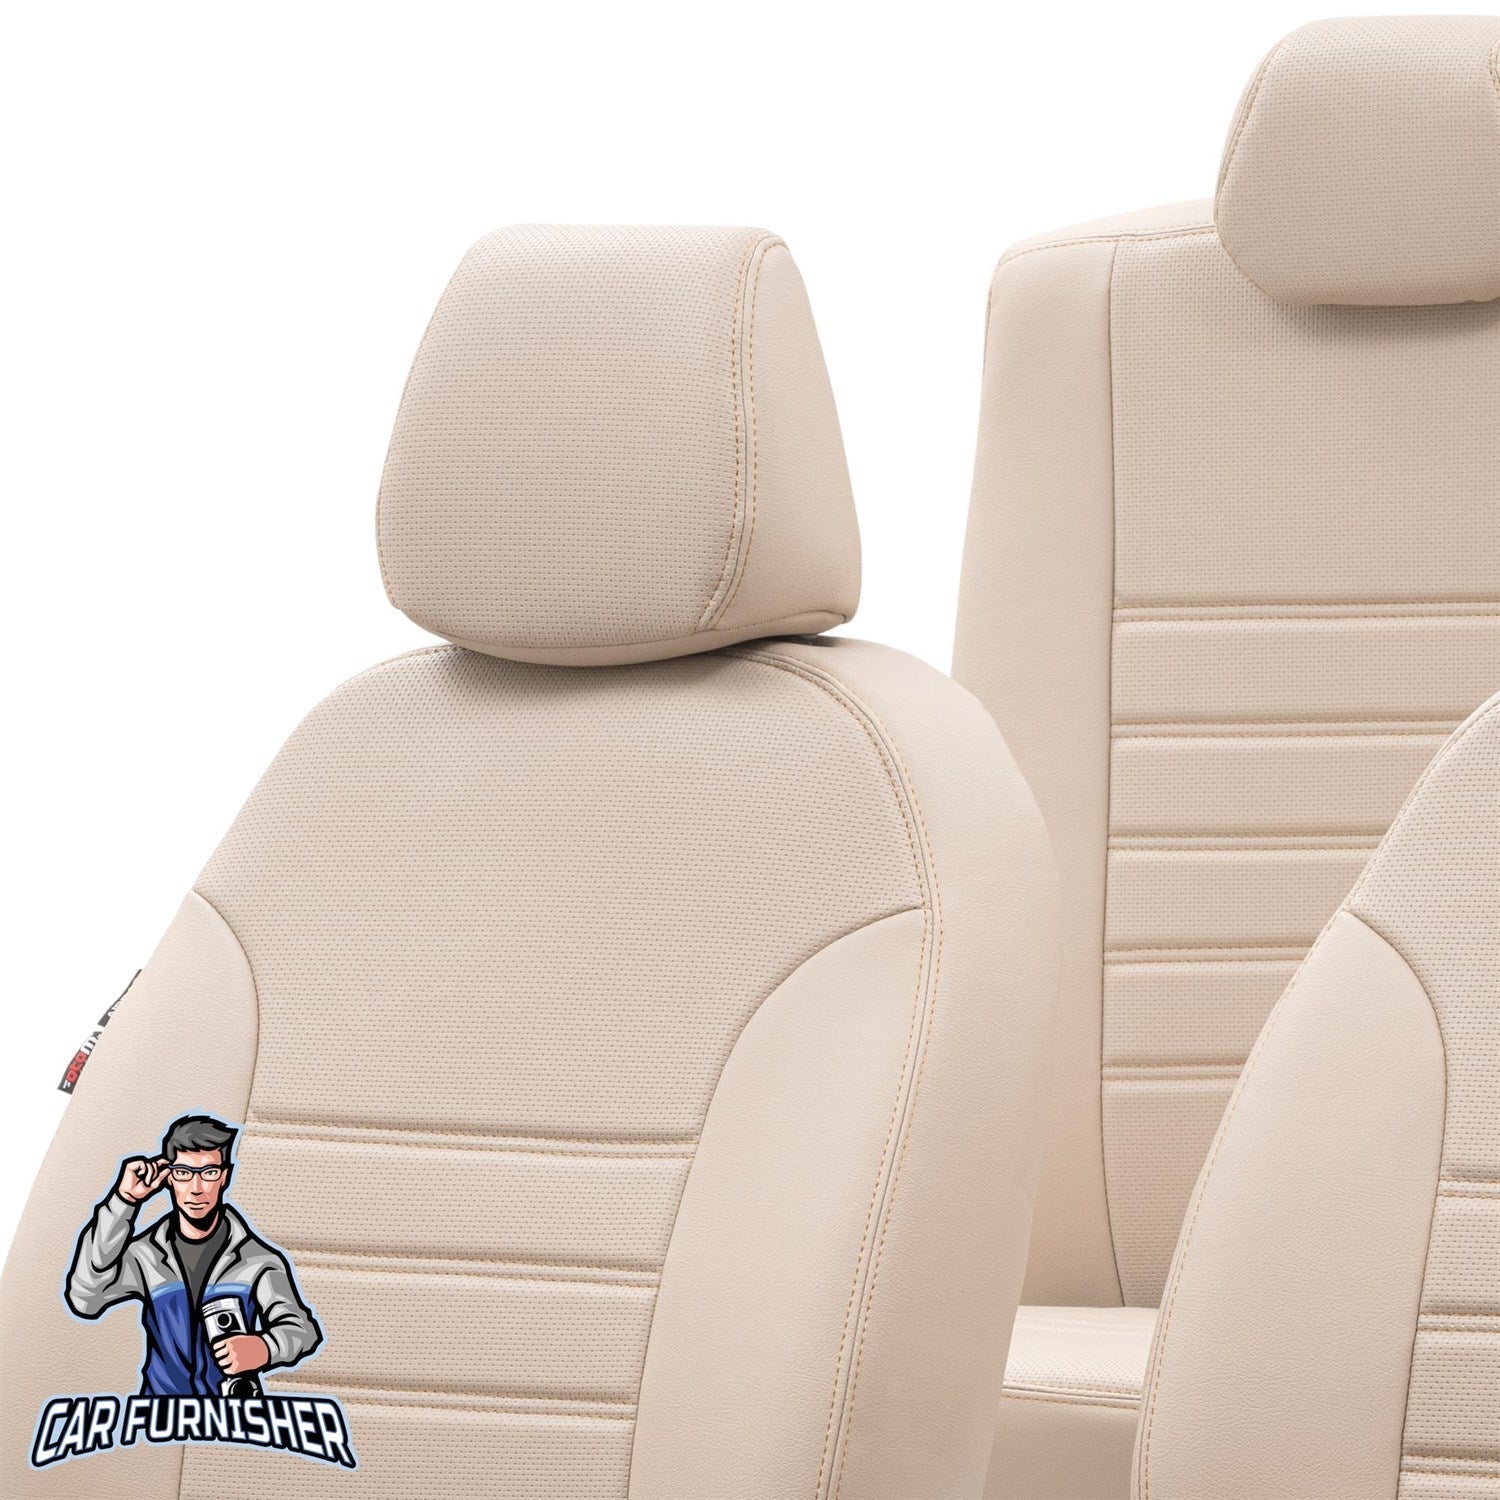 High-Quality Volkswagen Golf Seat Covers